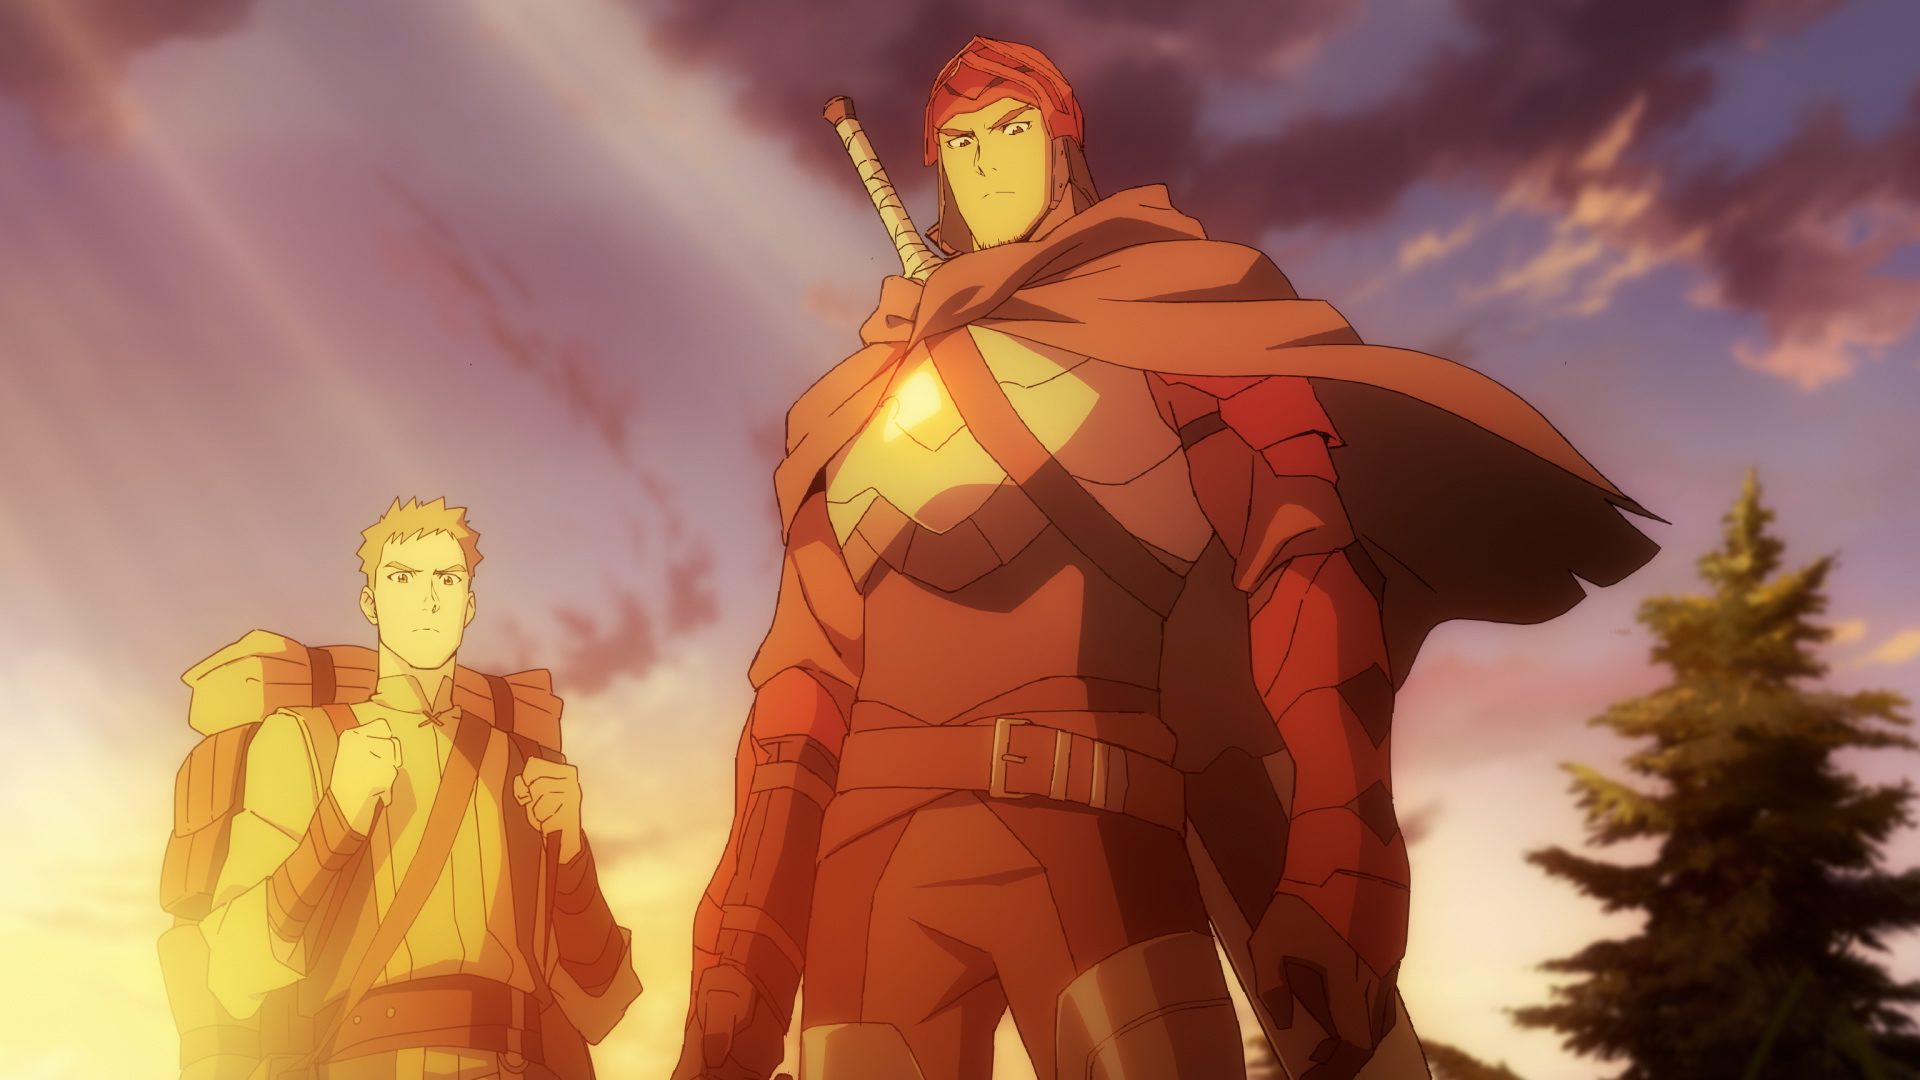 A new Netflix anime based on ‘DOTA 2’ is dropping in March